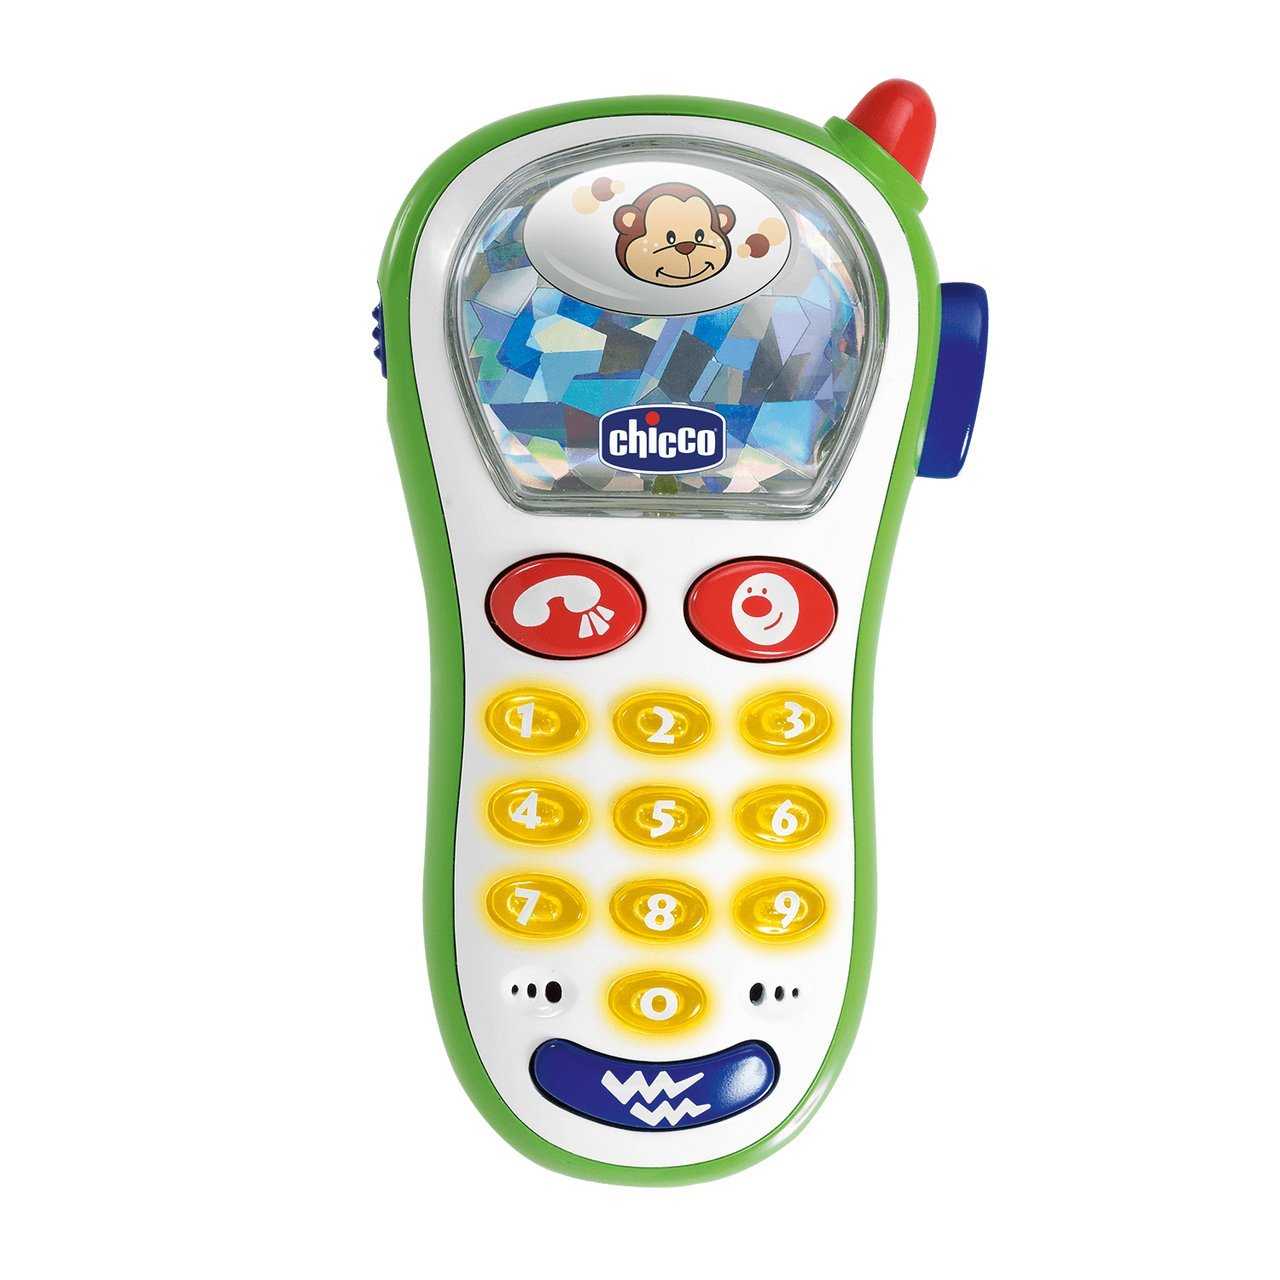 Vibrating Photo Phone First Activity Toy